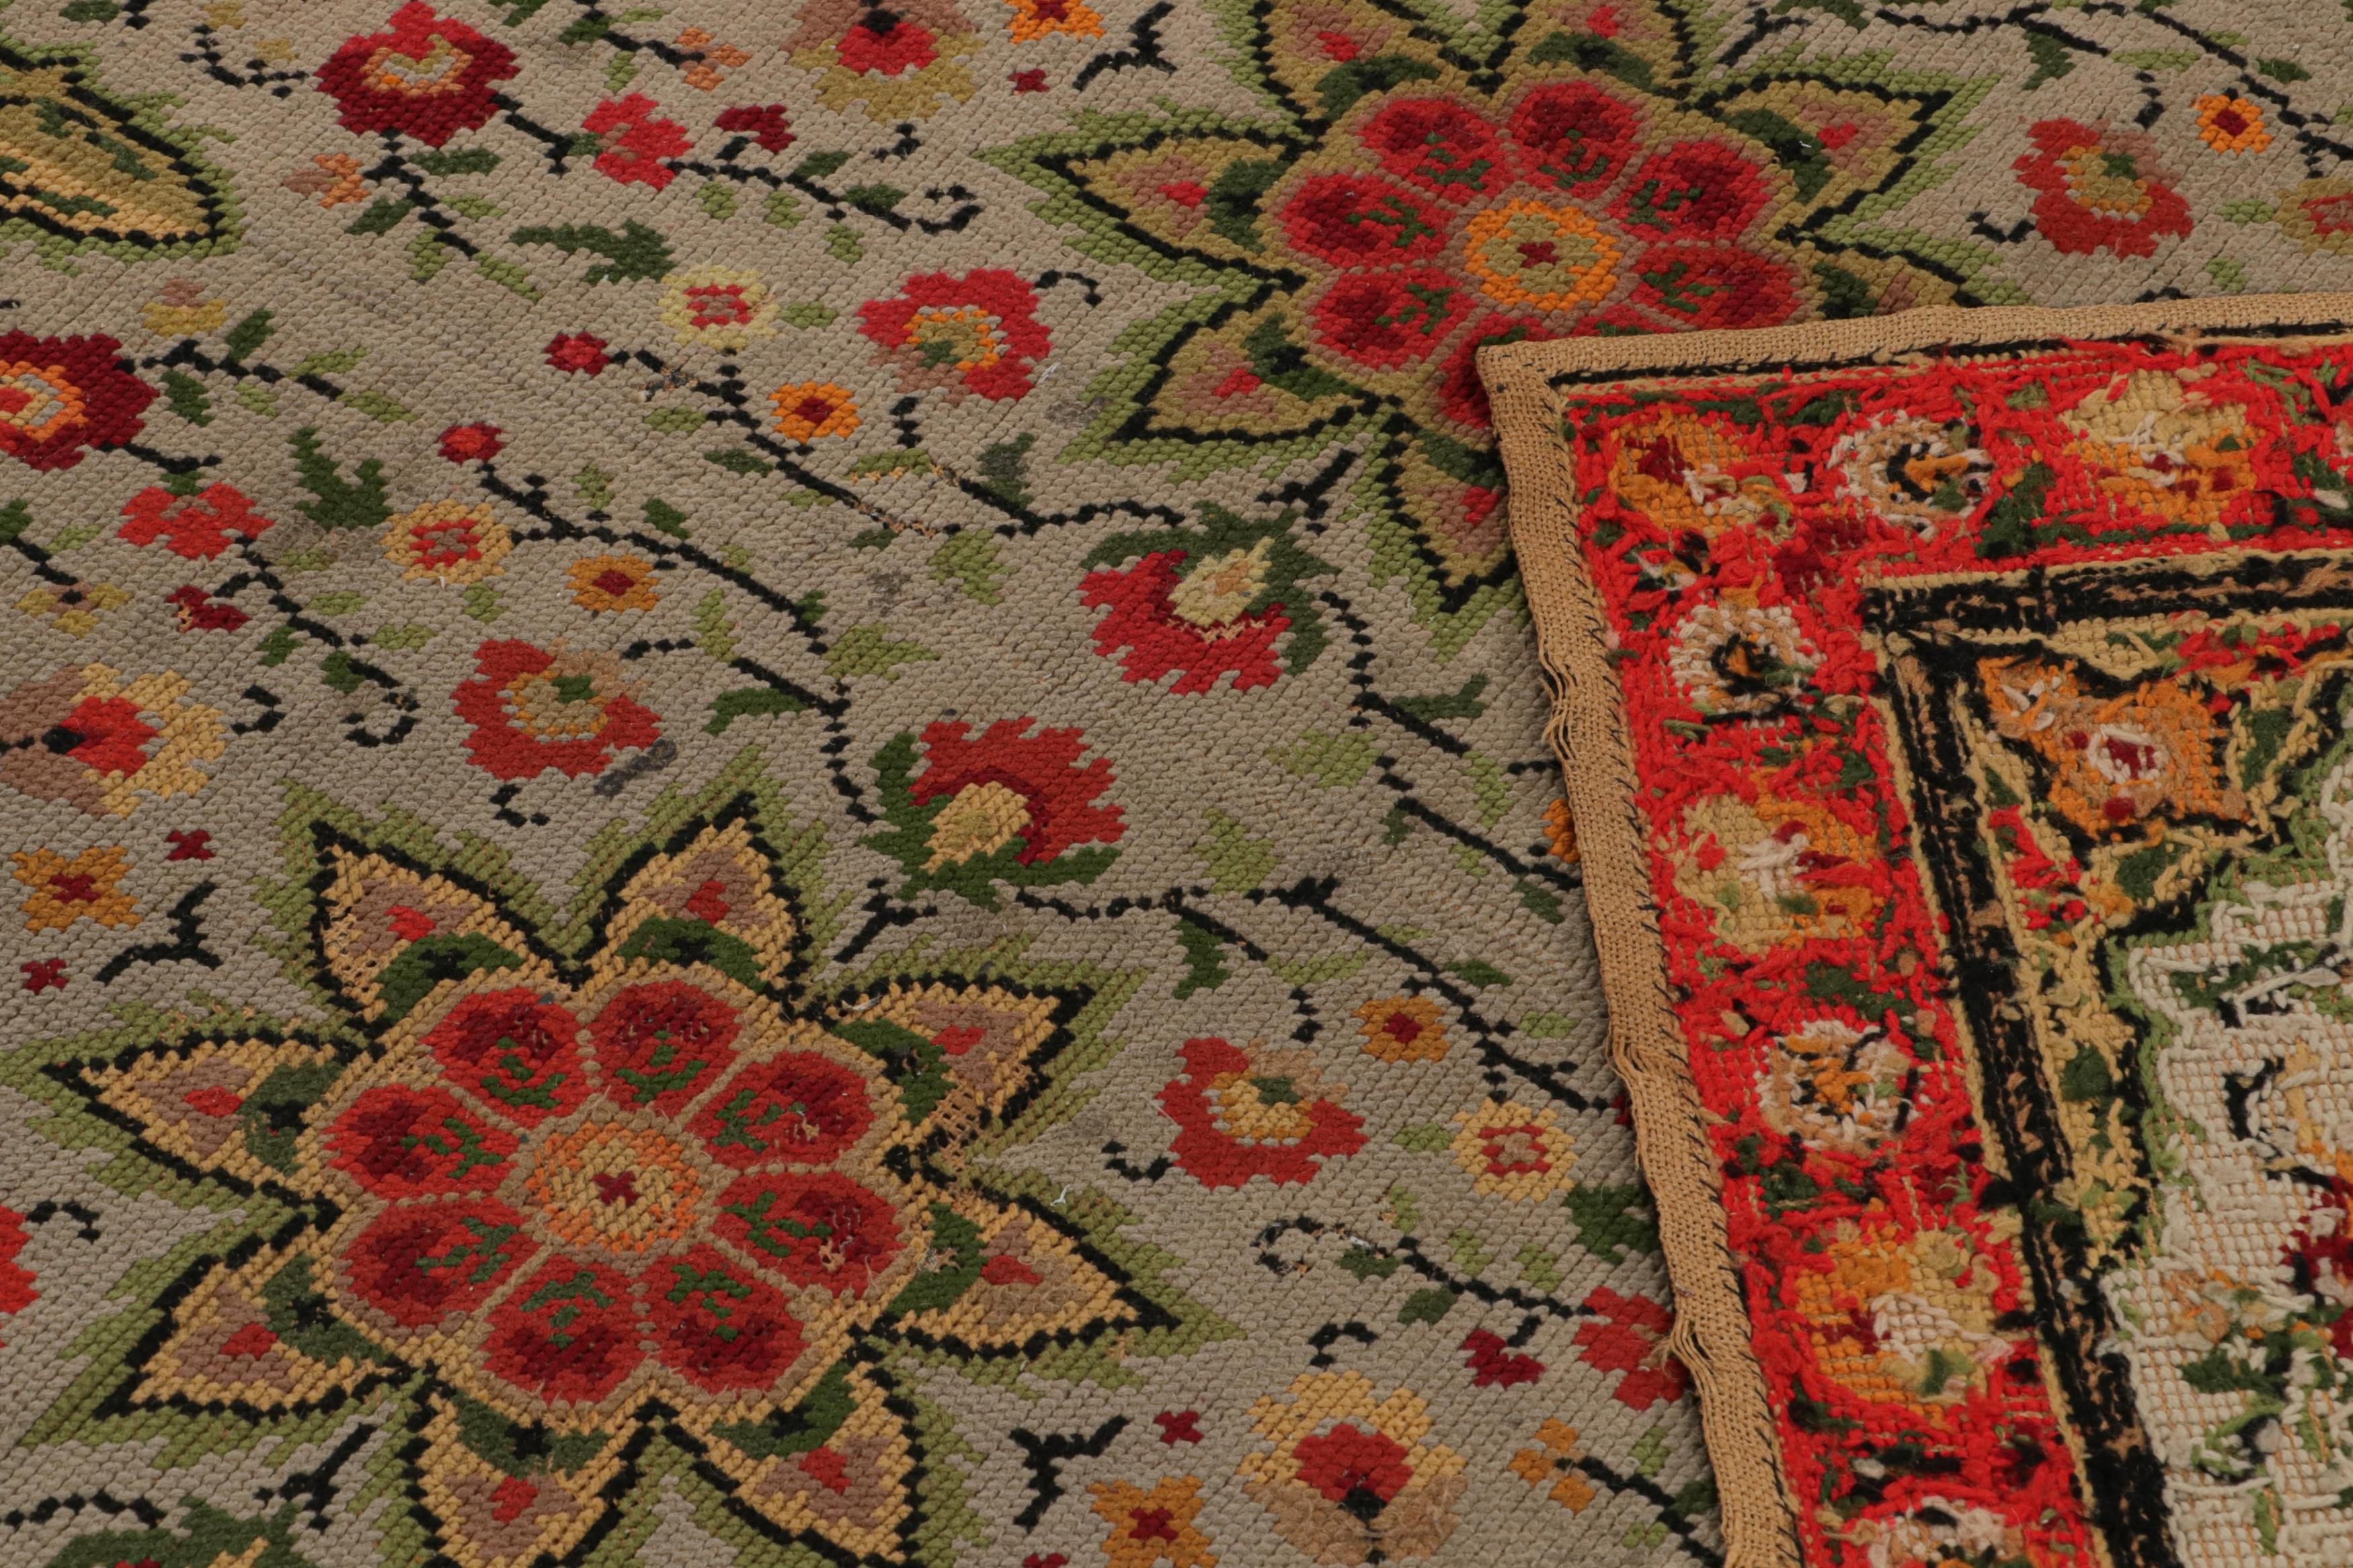 Antique French Needlepoint Rug in Beige with Floral Patterns, from Rug & Kilim For Sale 1